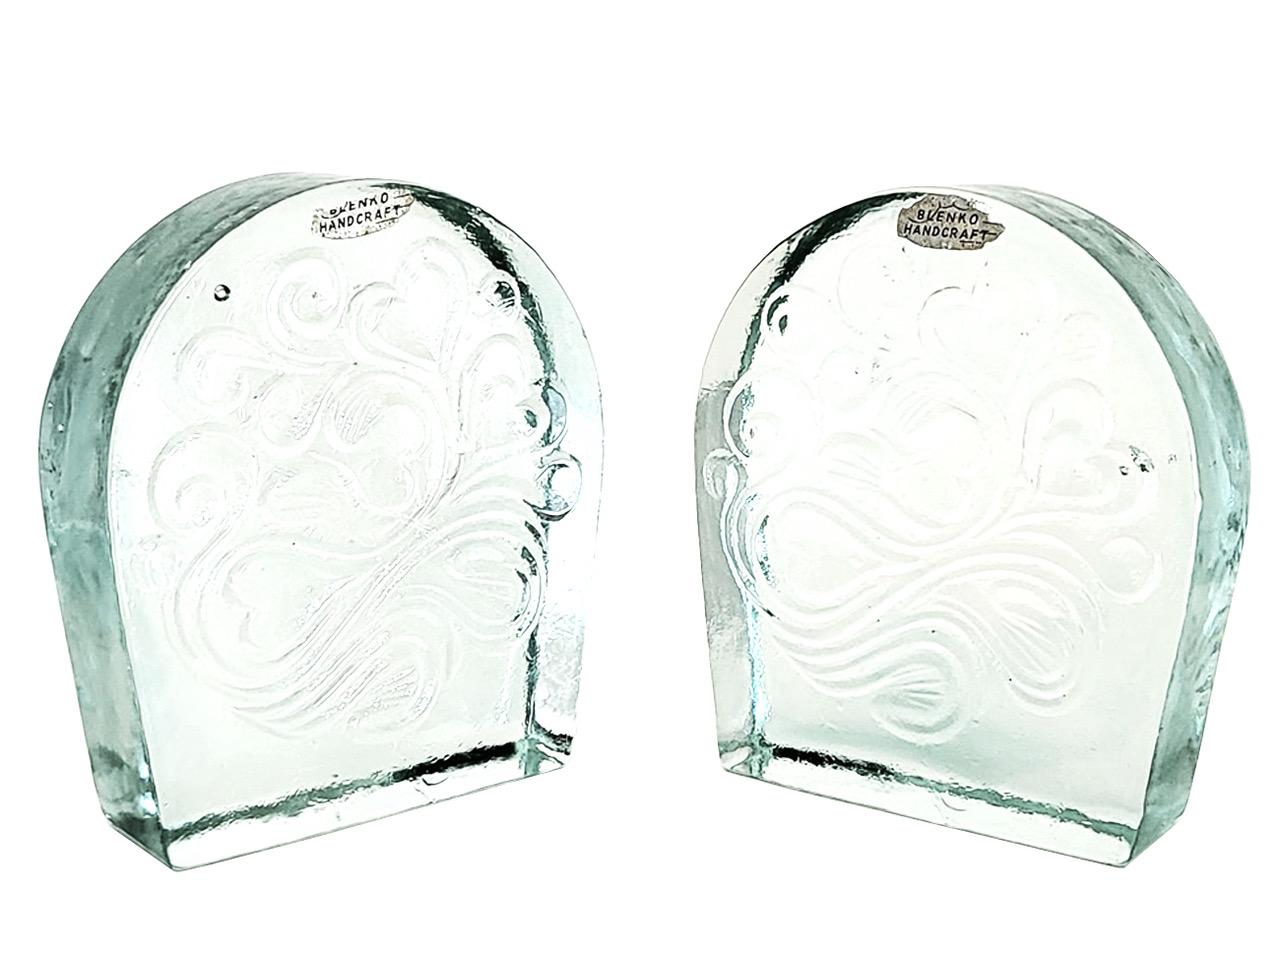 Blenko Glass Twisted Hearts Clear Block Bookends Wayne Husted, 1969 For Sale 1